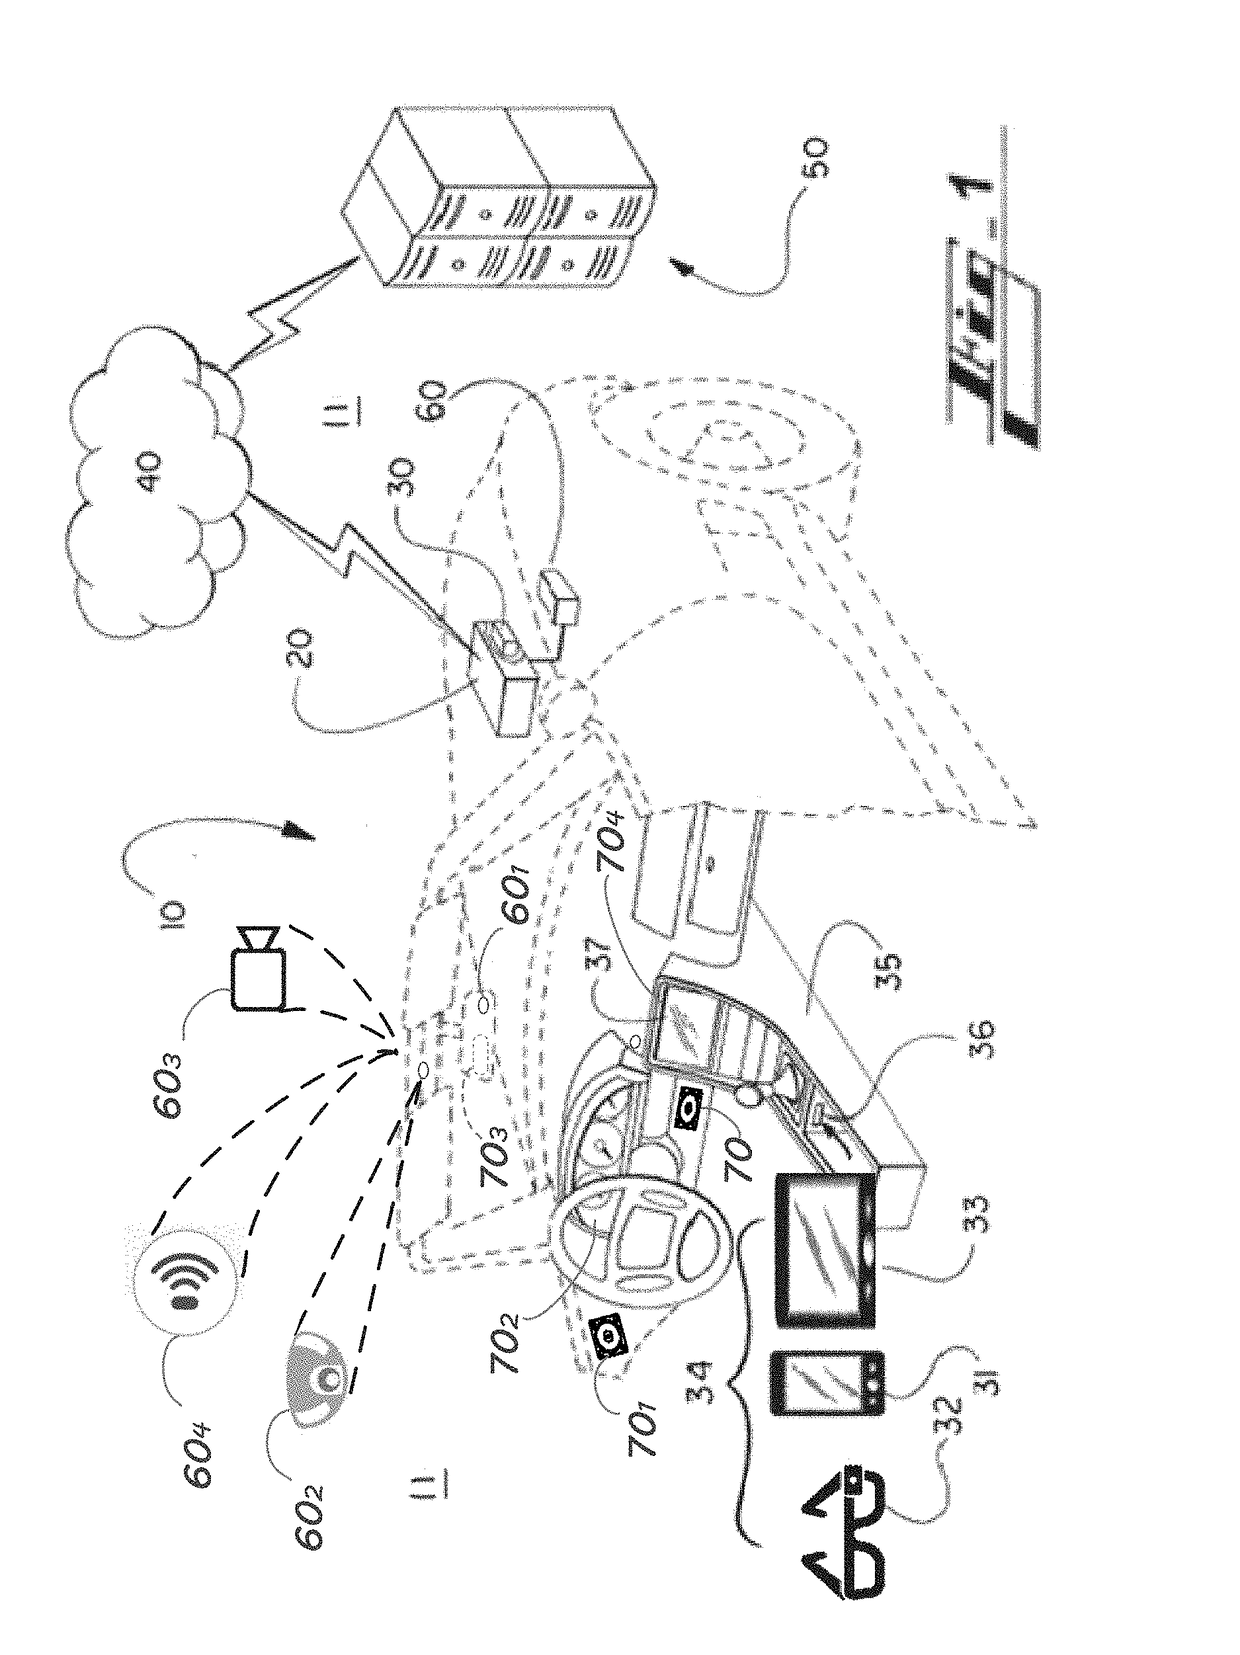 Systems and methods for implementing relative tags in connection with use of autonomous vehicles